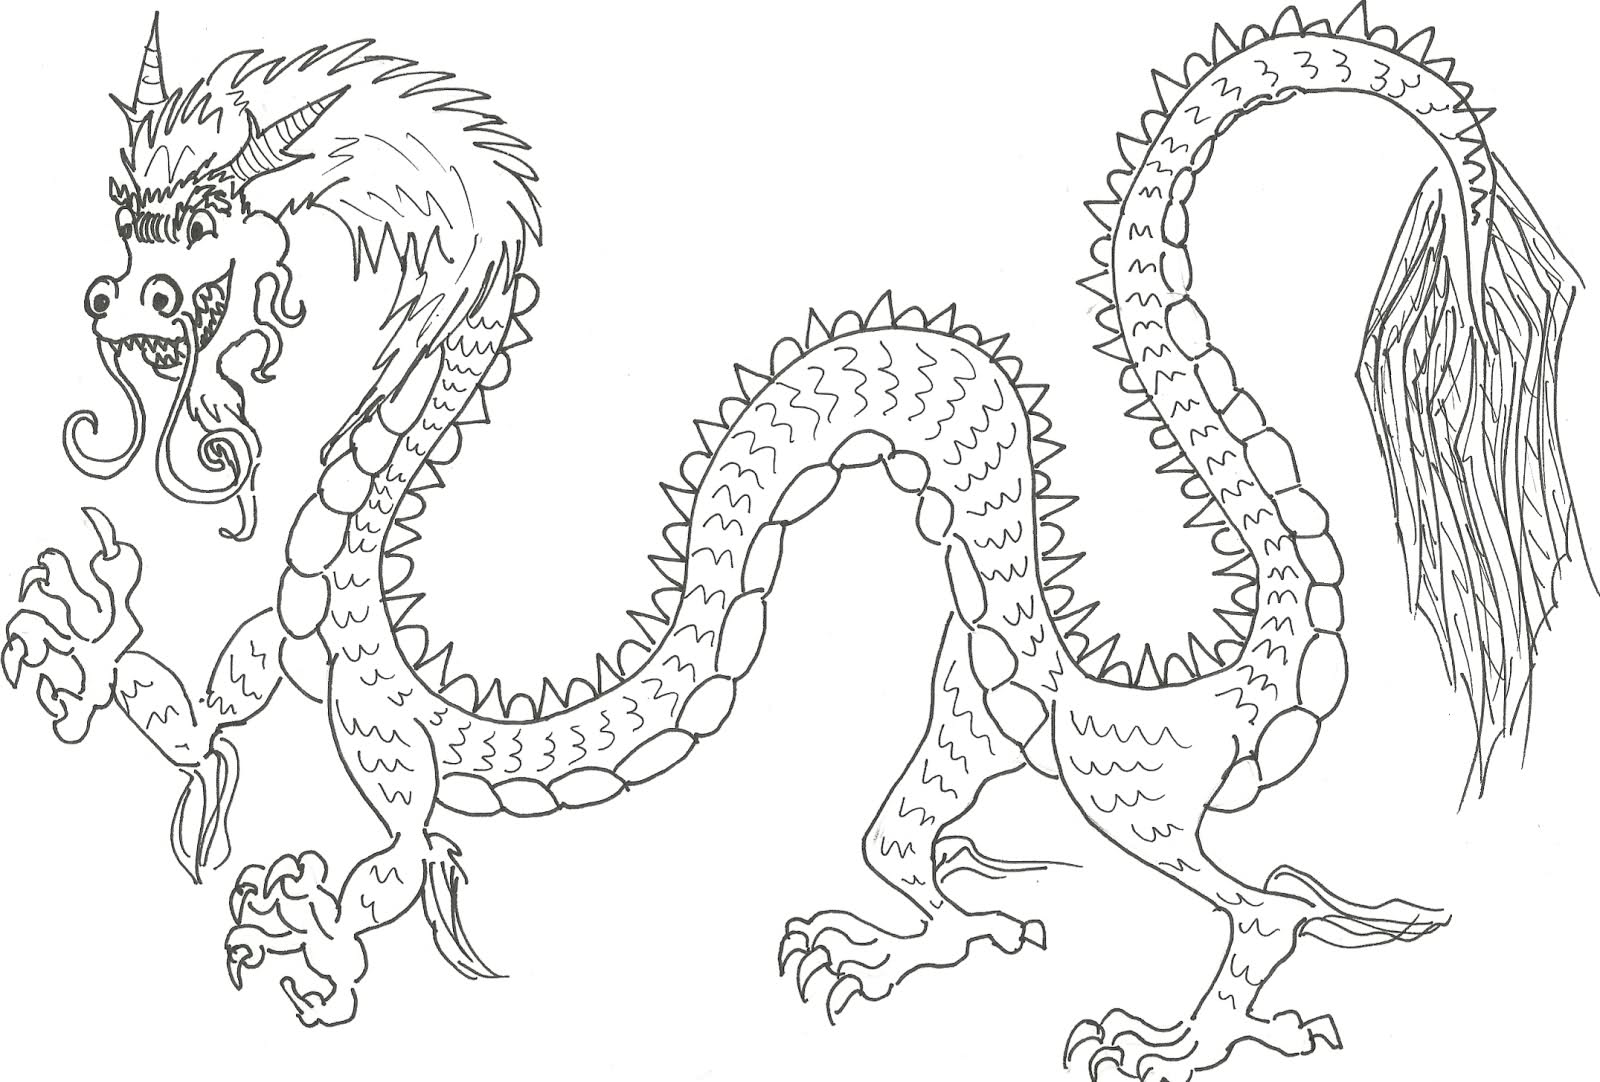 Bakugan Coloring Pages Dragonoid Colossus Coloring Pages